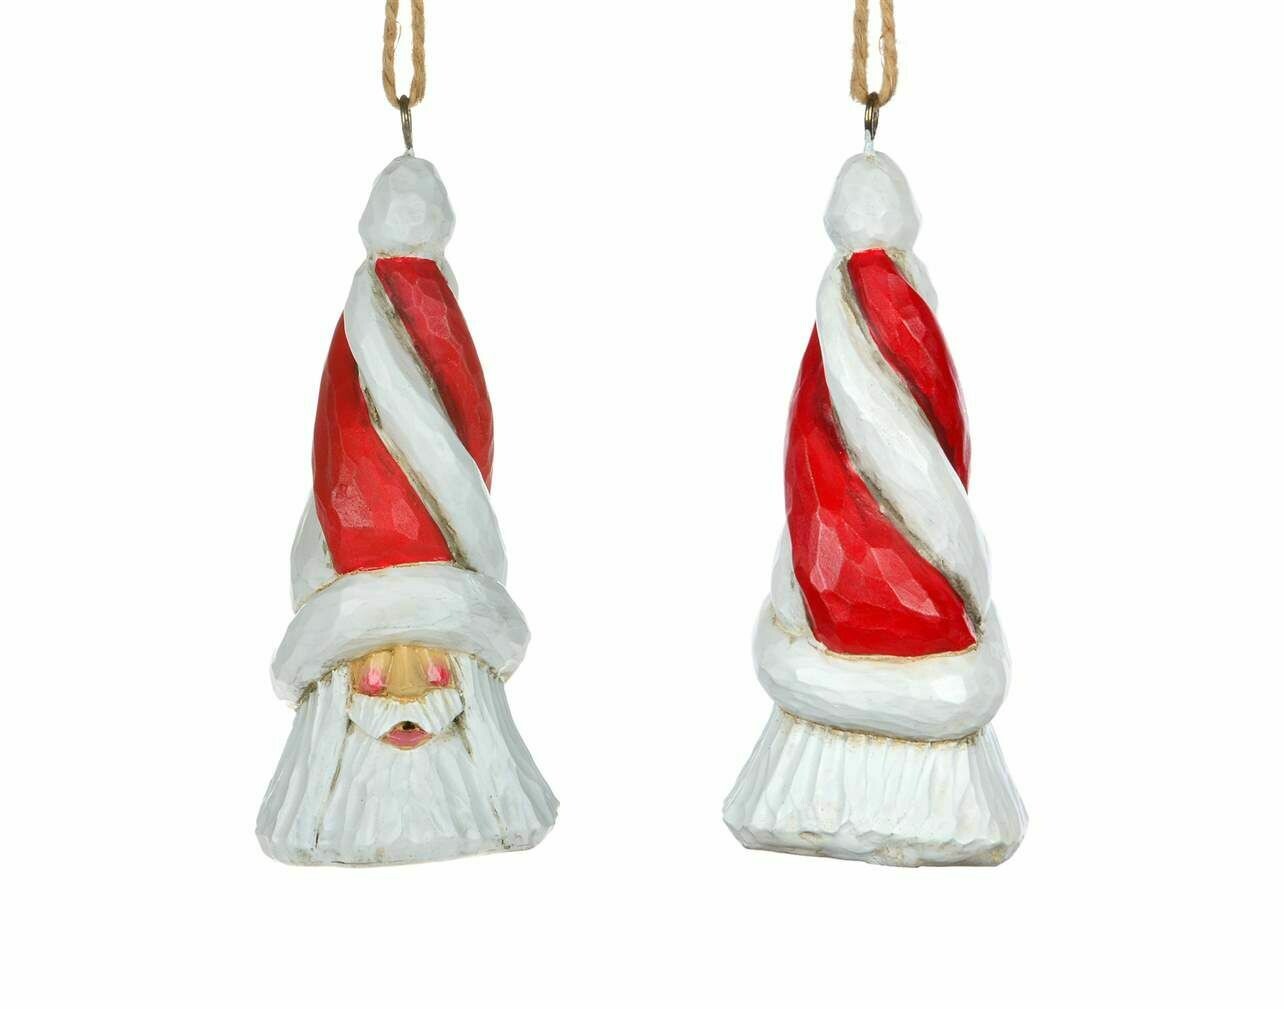 Cottage Carvings Candy Cane Santa Head Ornament - 5" - will stand or hang - Canadian Artist Dave Francis